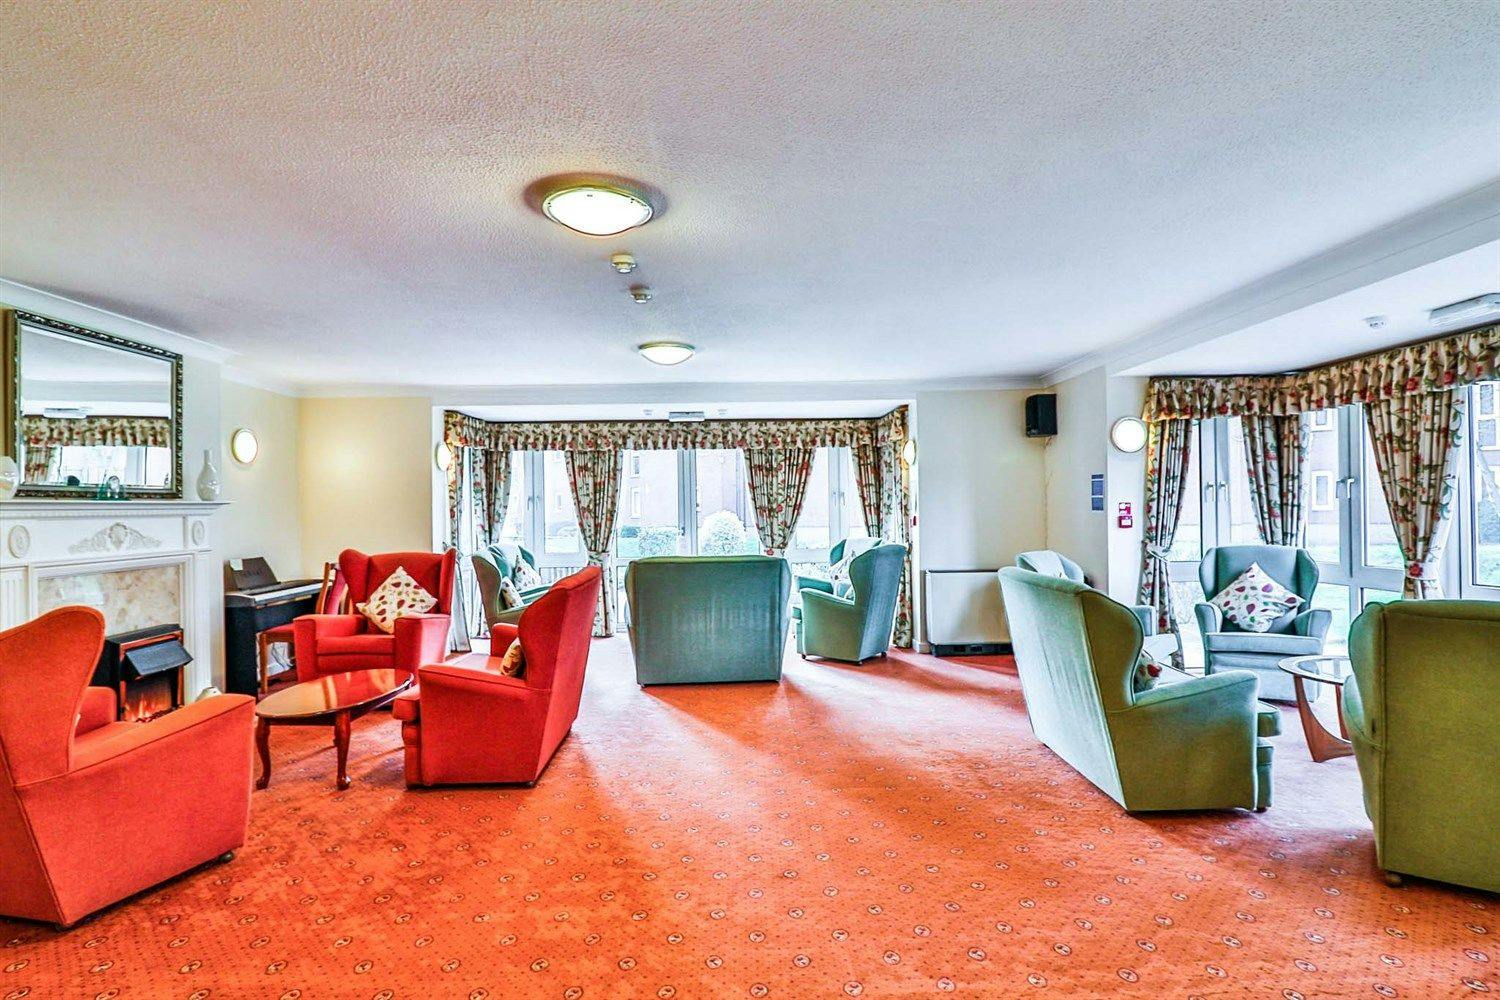 Communal Lounge at Homechase House Retirement Development in Southport, Merseyside